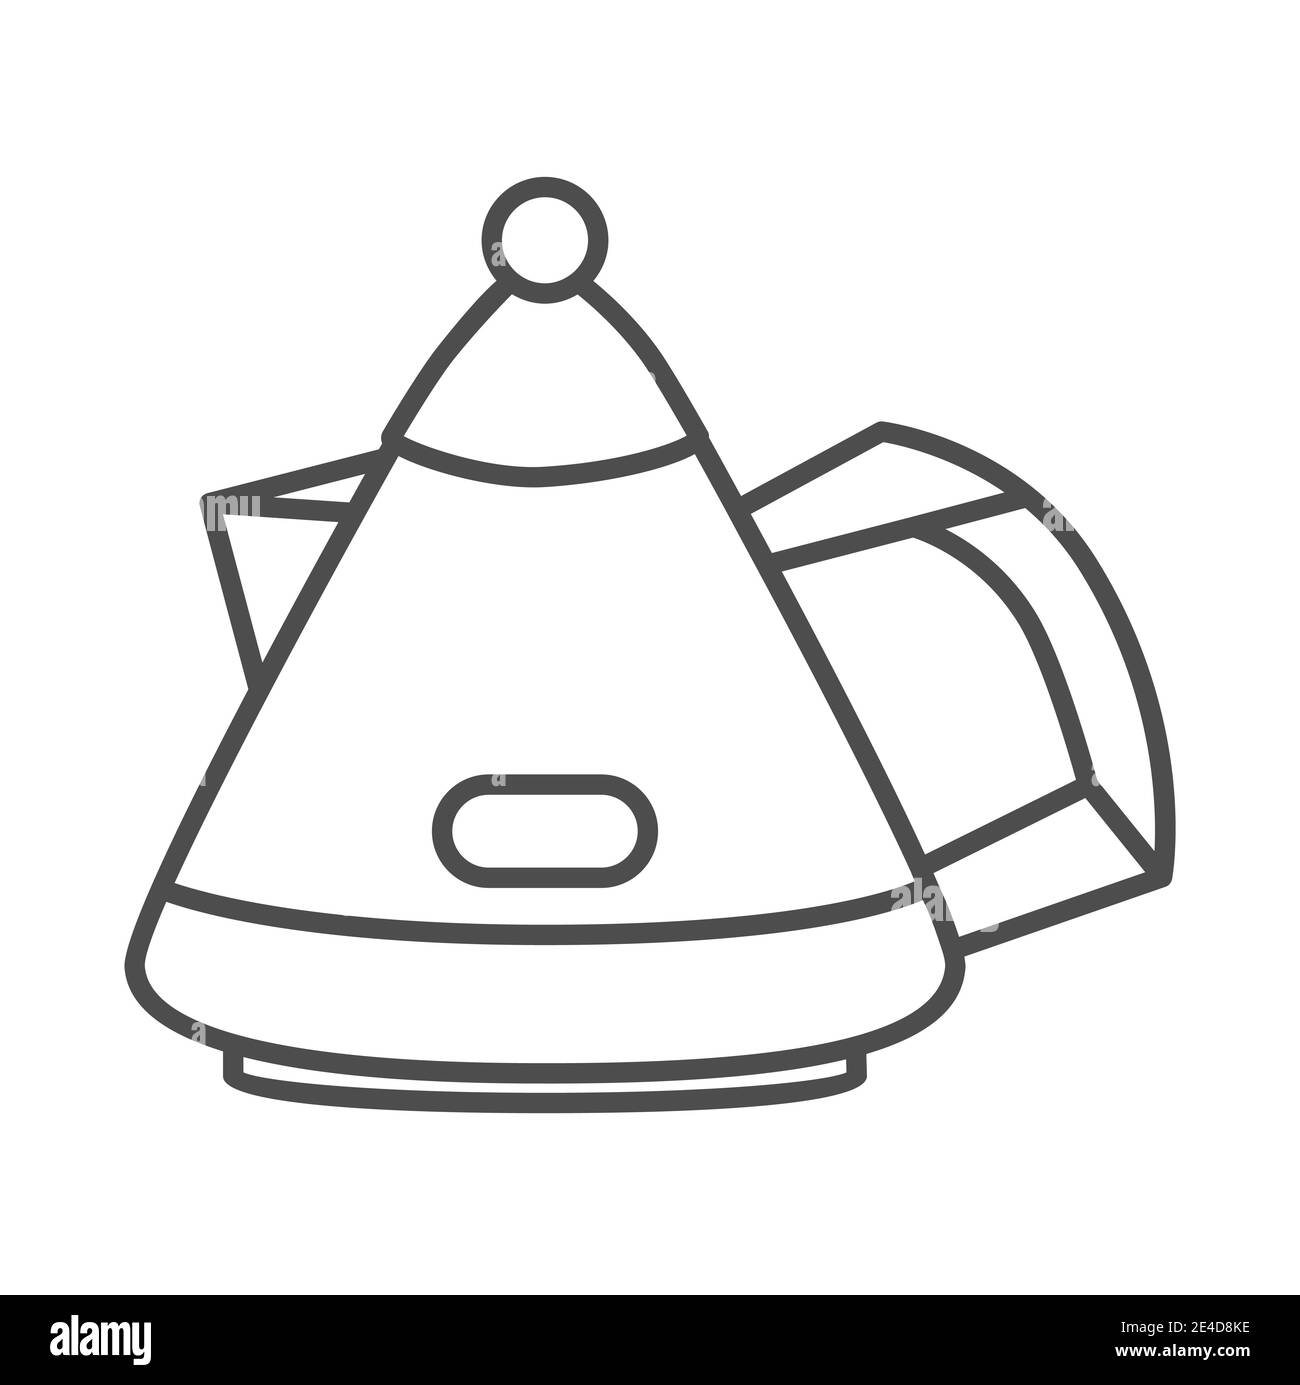 Modern teapot thin line icon, kitchenware concept, Tea kettle sign on white background, kettle for boiling water and cooking tea icon in outline style Stock Vector